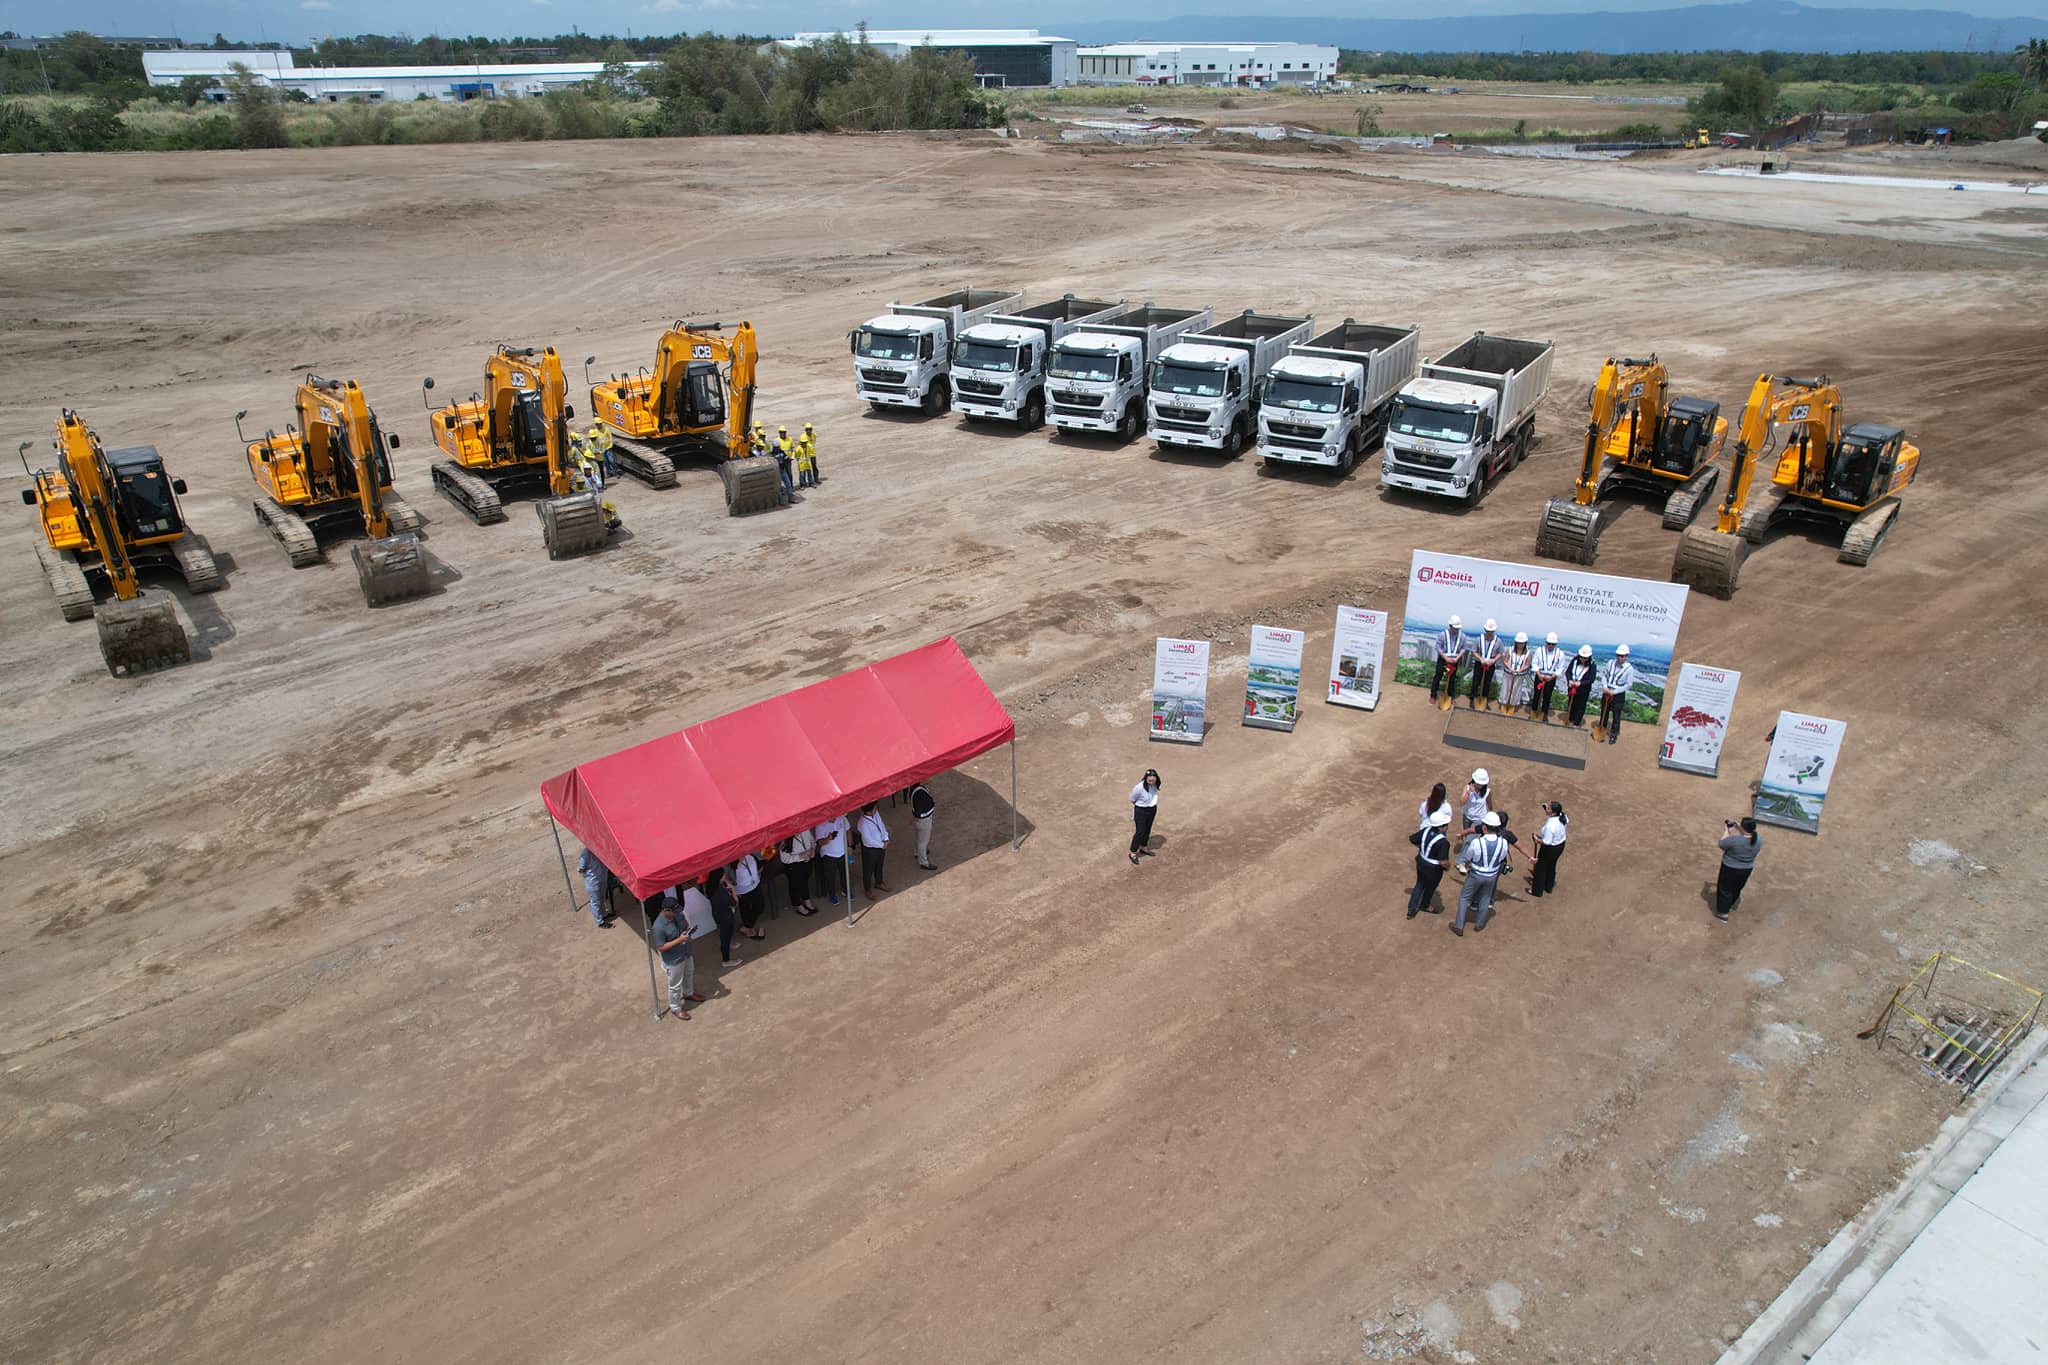 Aboitiz InfraCapital’s LIMA Estate begins 96-hectare industrial expansion, projected to add up to 31,000 jobs